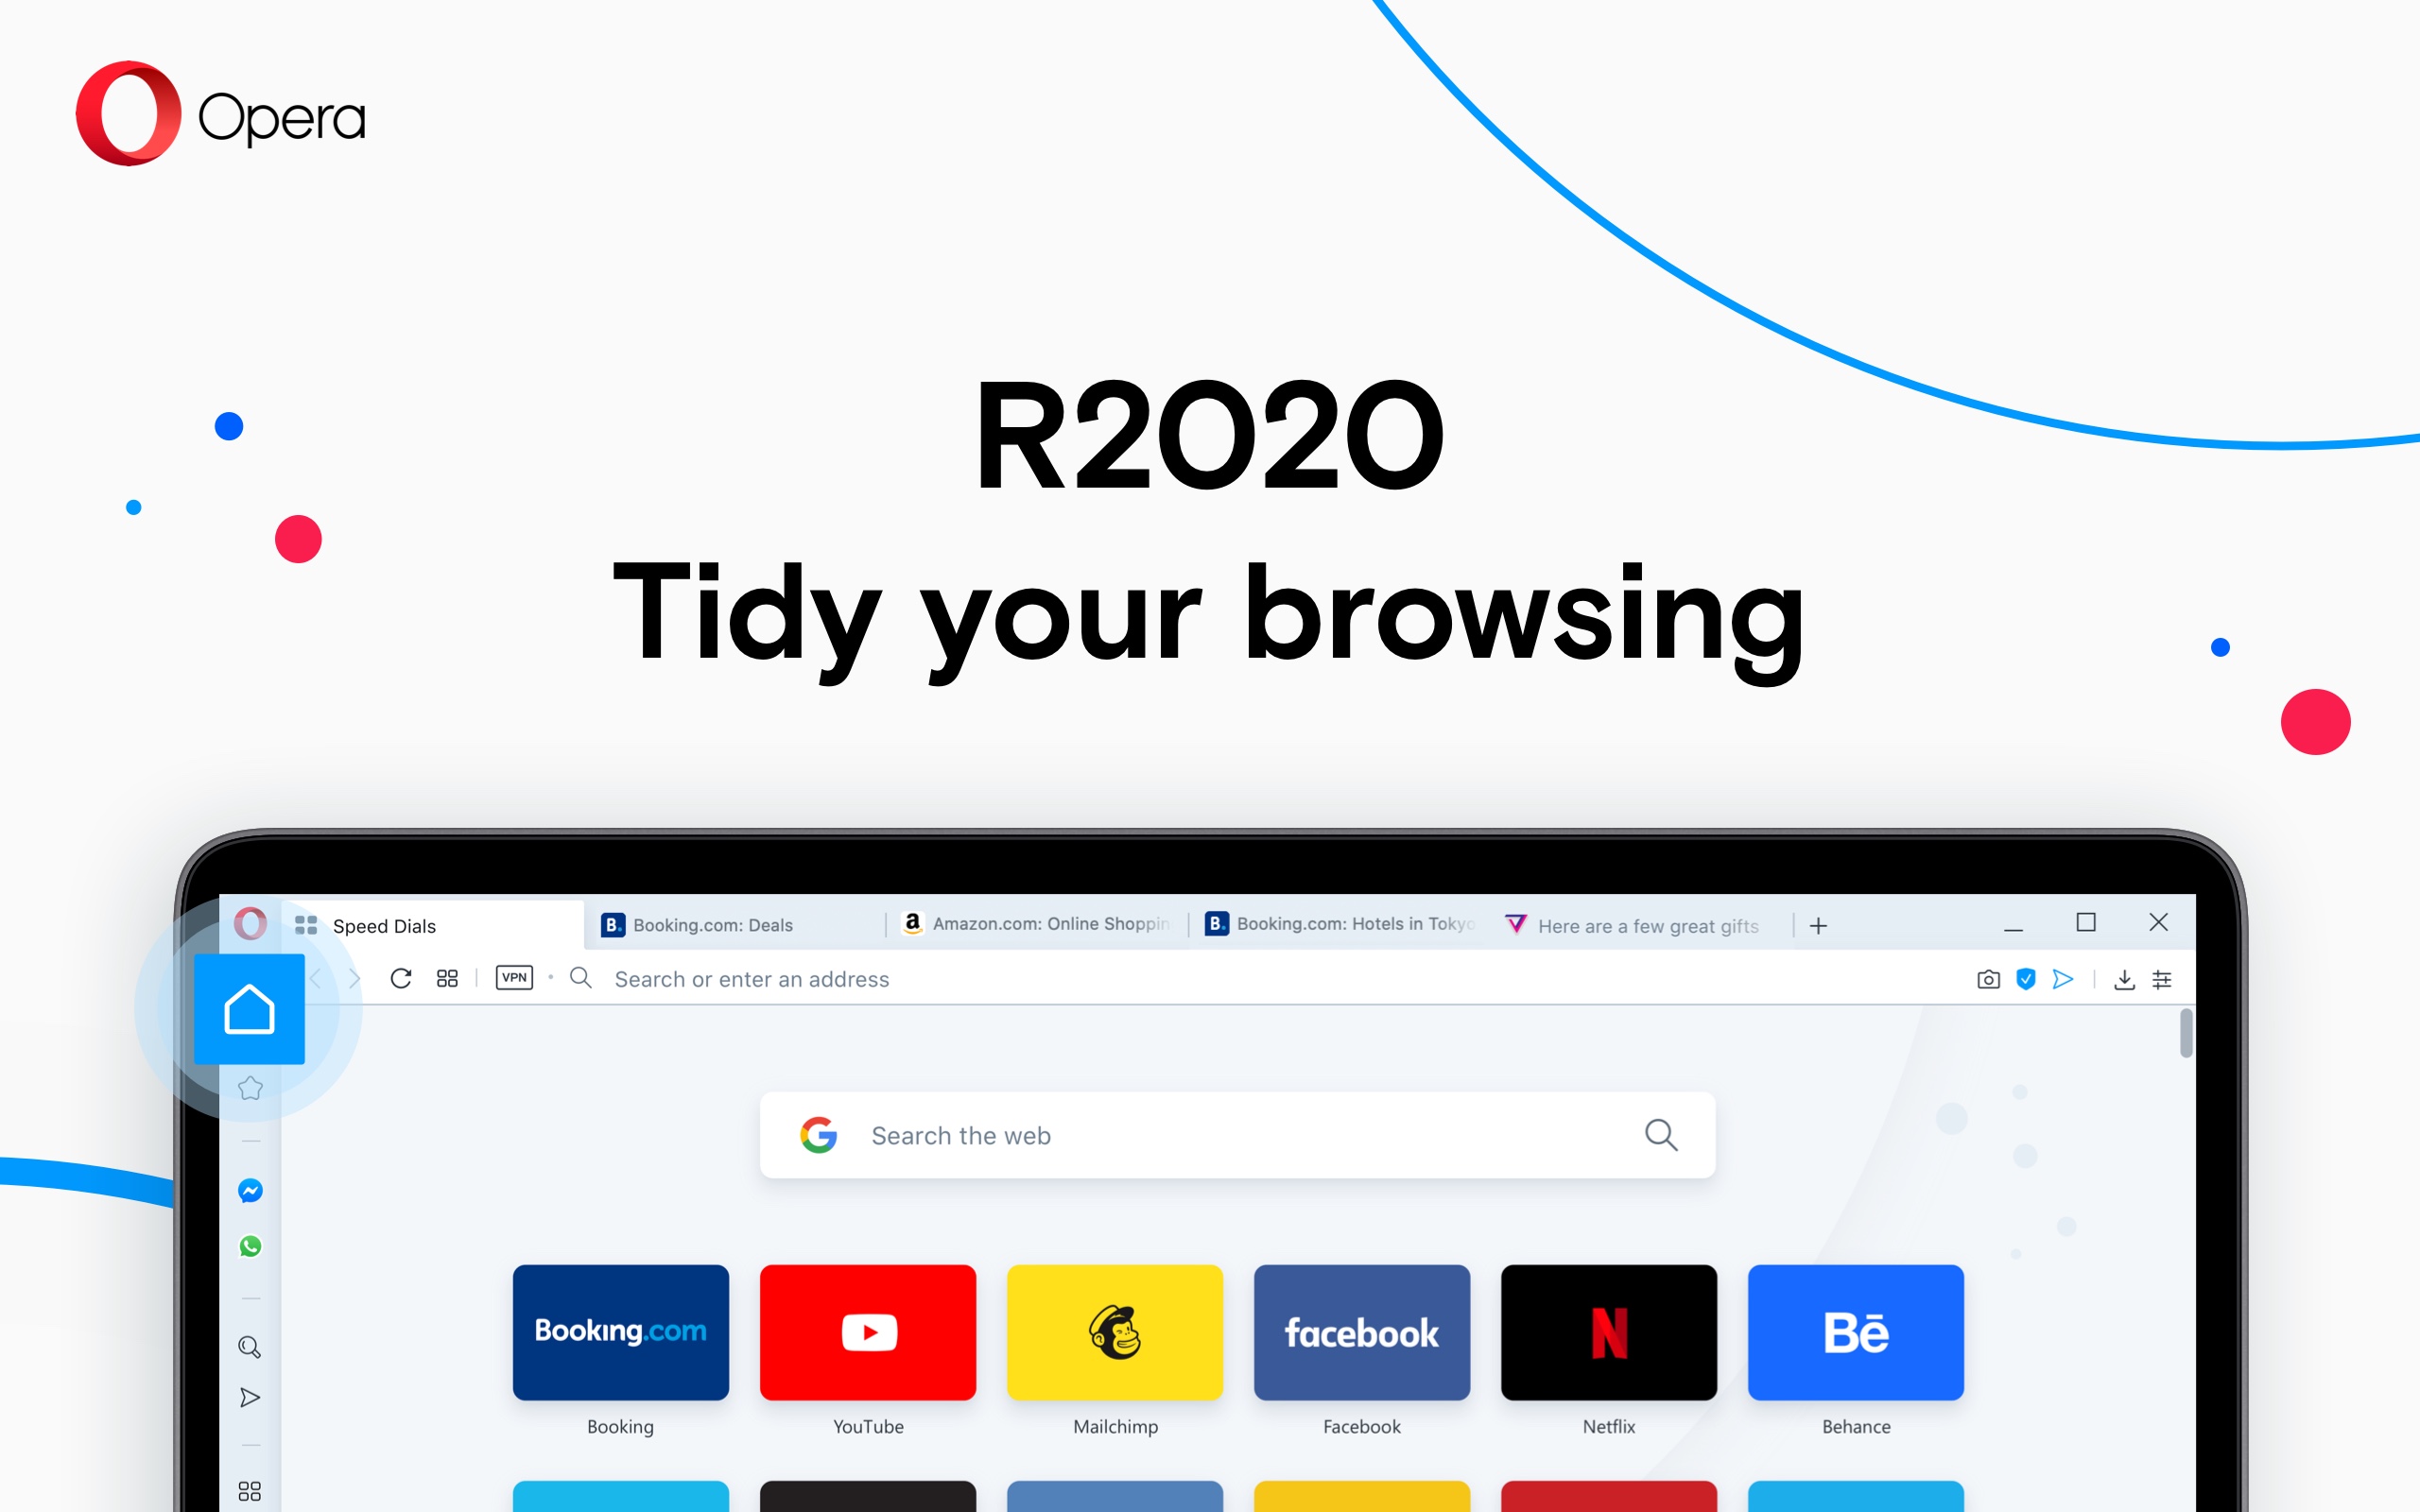 Opera 67 lets you tidy your browsing